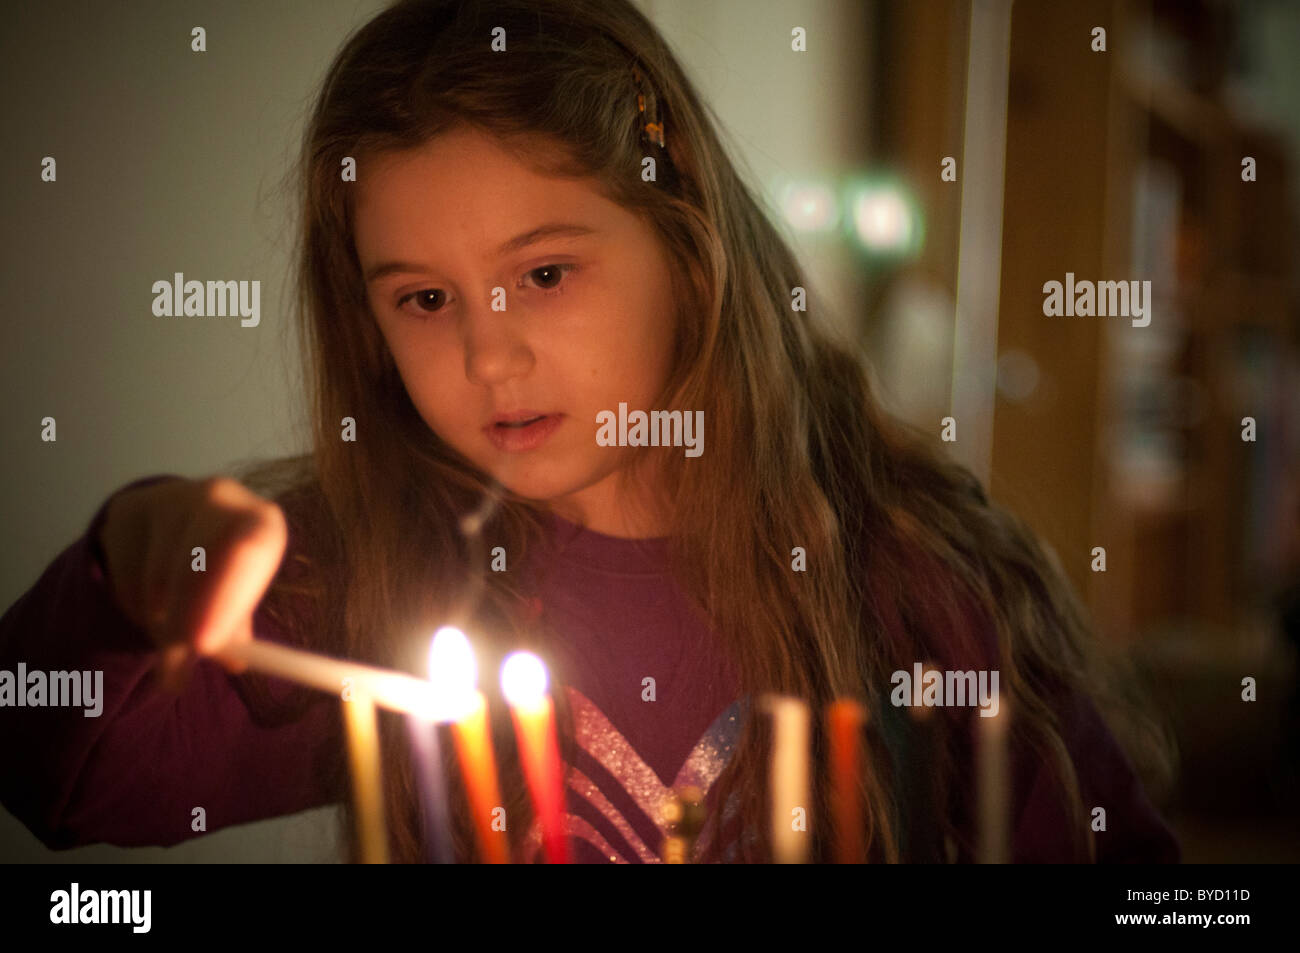 A young girls lights Chanukah Candles Stock Photo